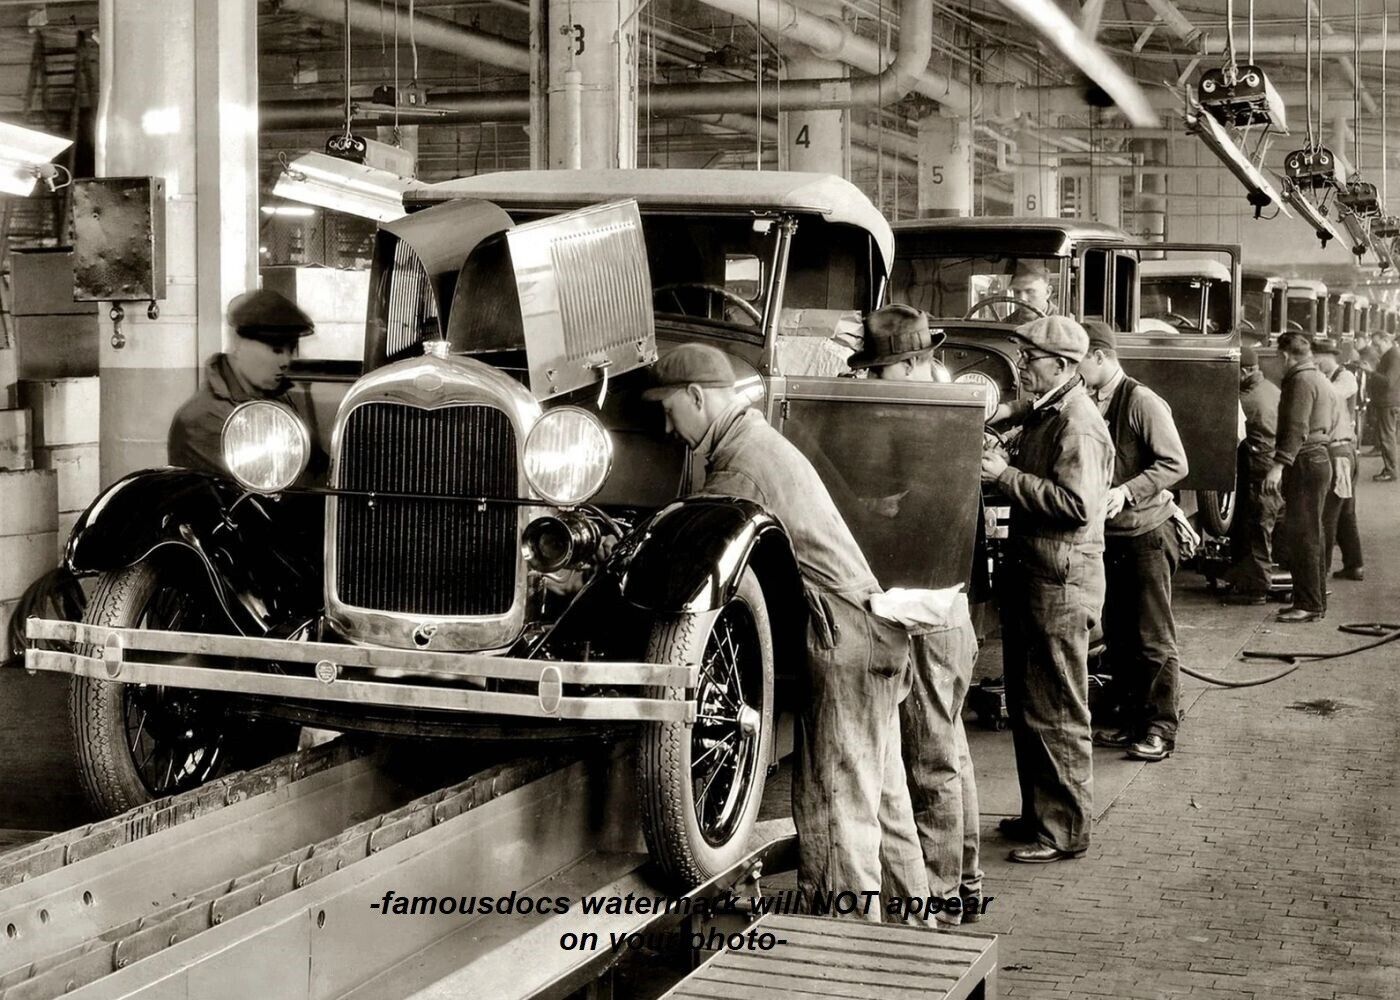 1930 Model A Ford Factory PHOTO Prohibition Era Car Assembly Plant